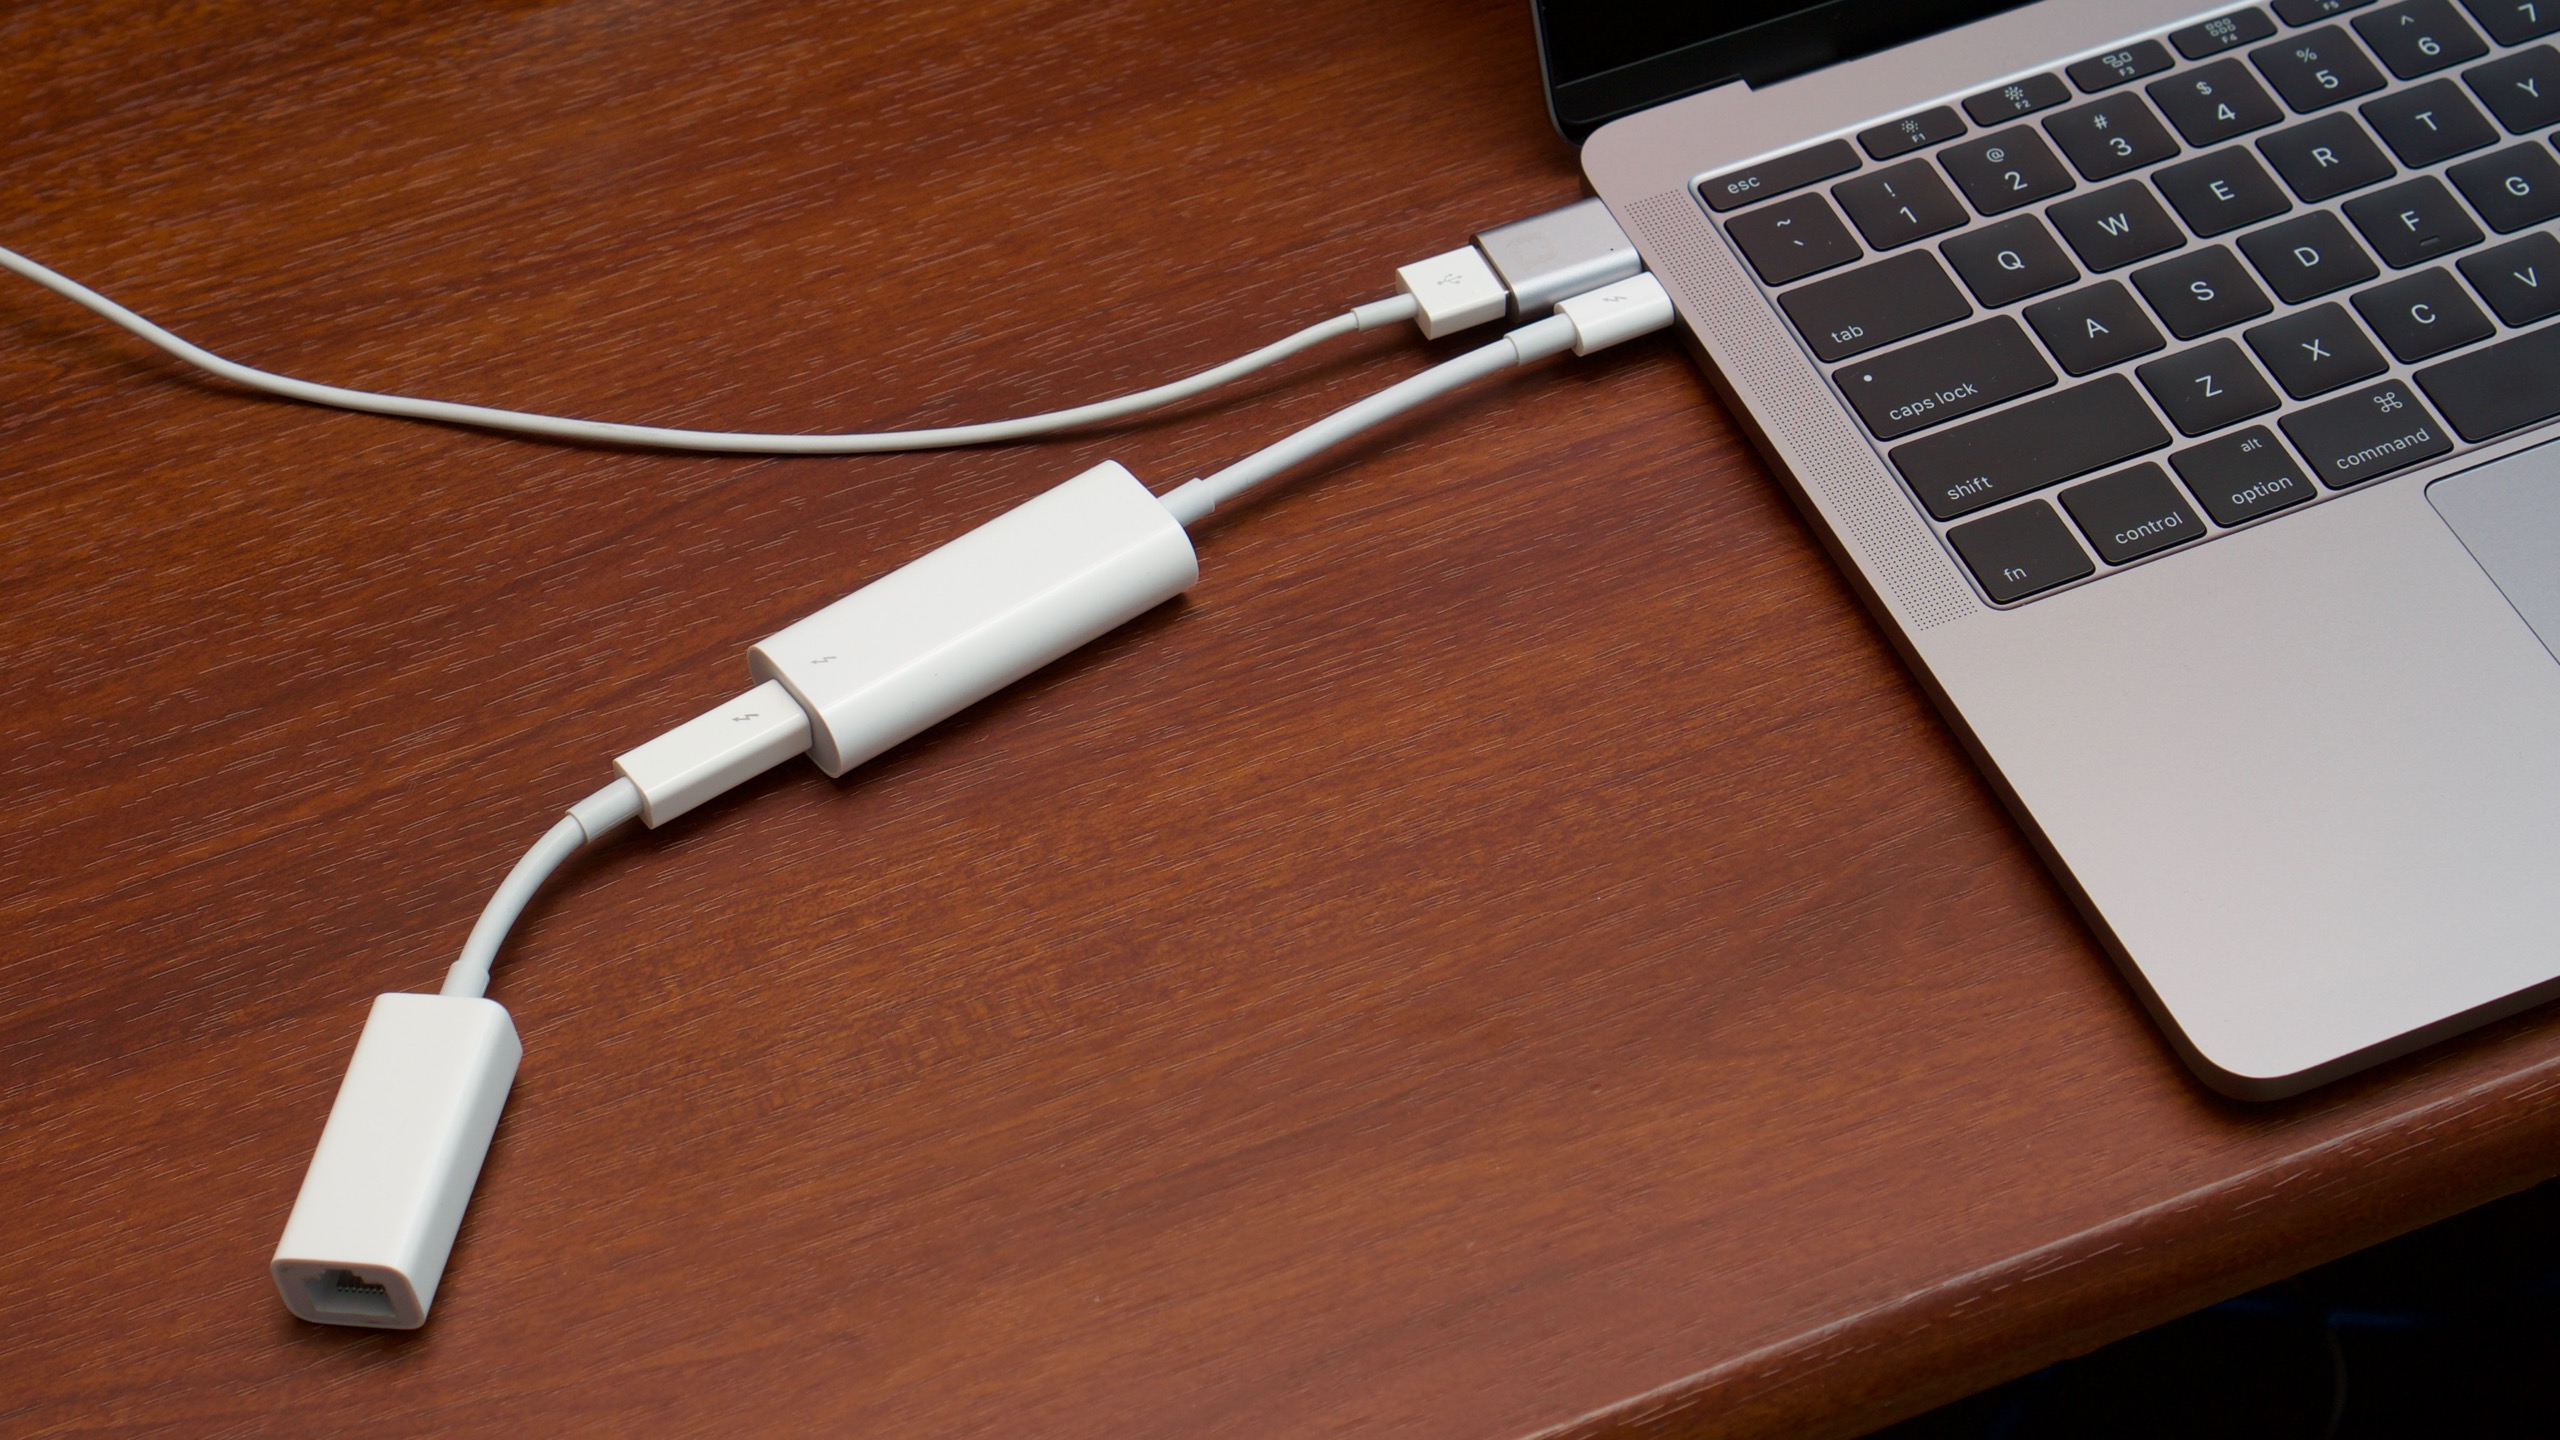 Dongles for macs